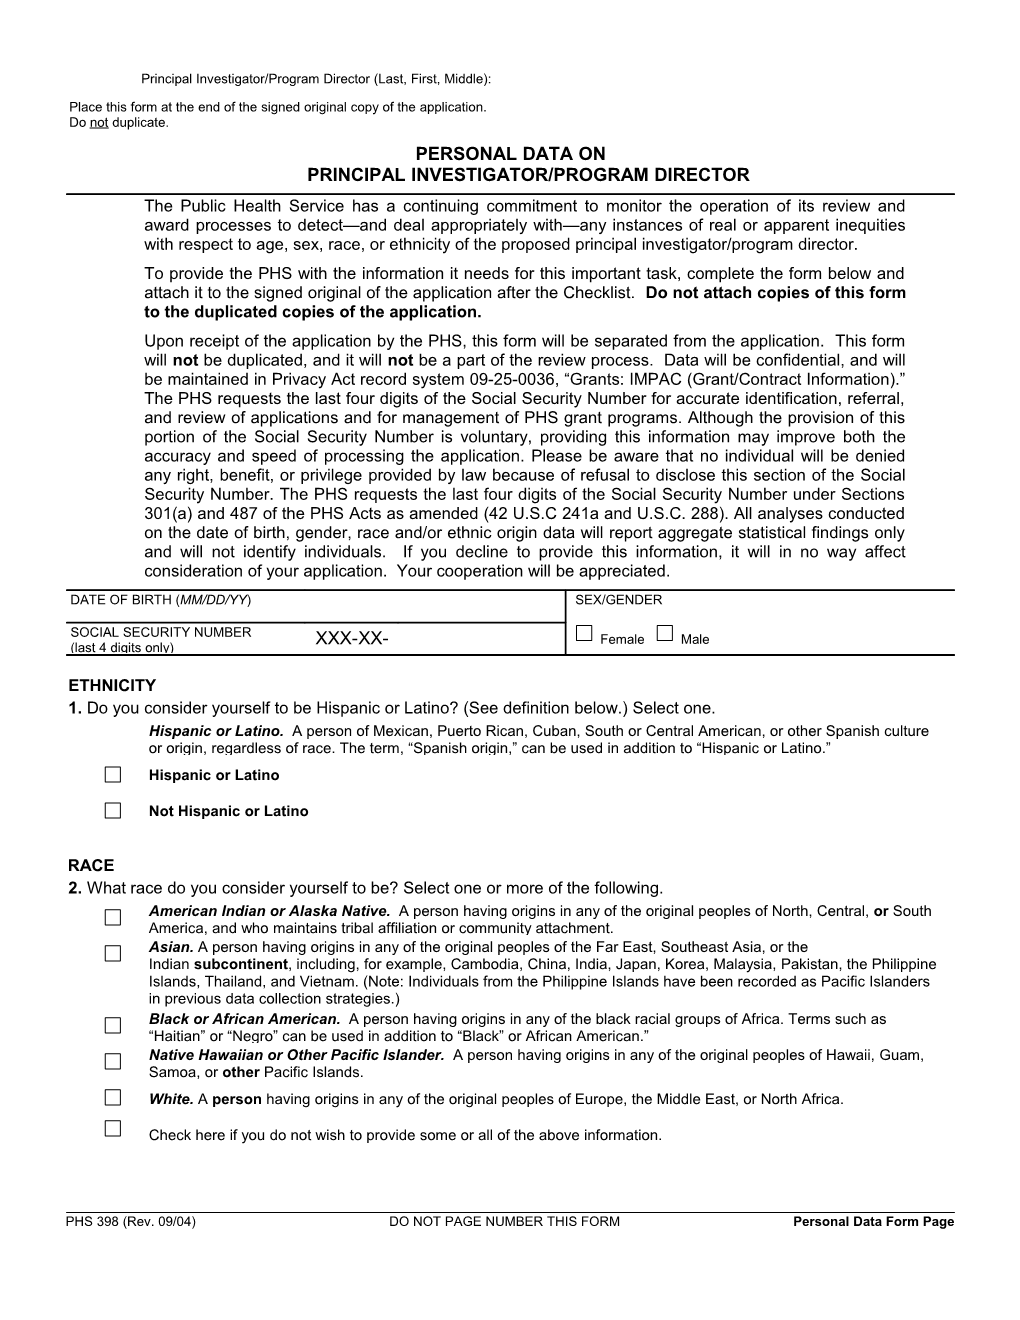 PHS 398 (Rev. 9/04), Personal Data Form Page